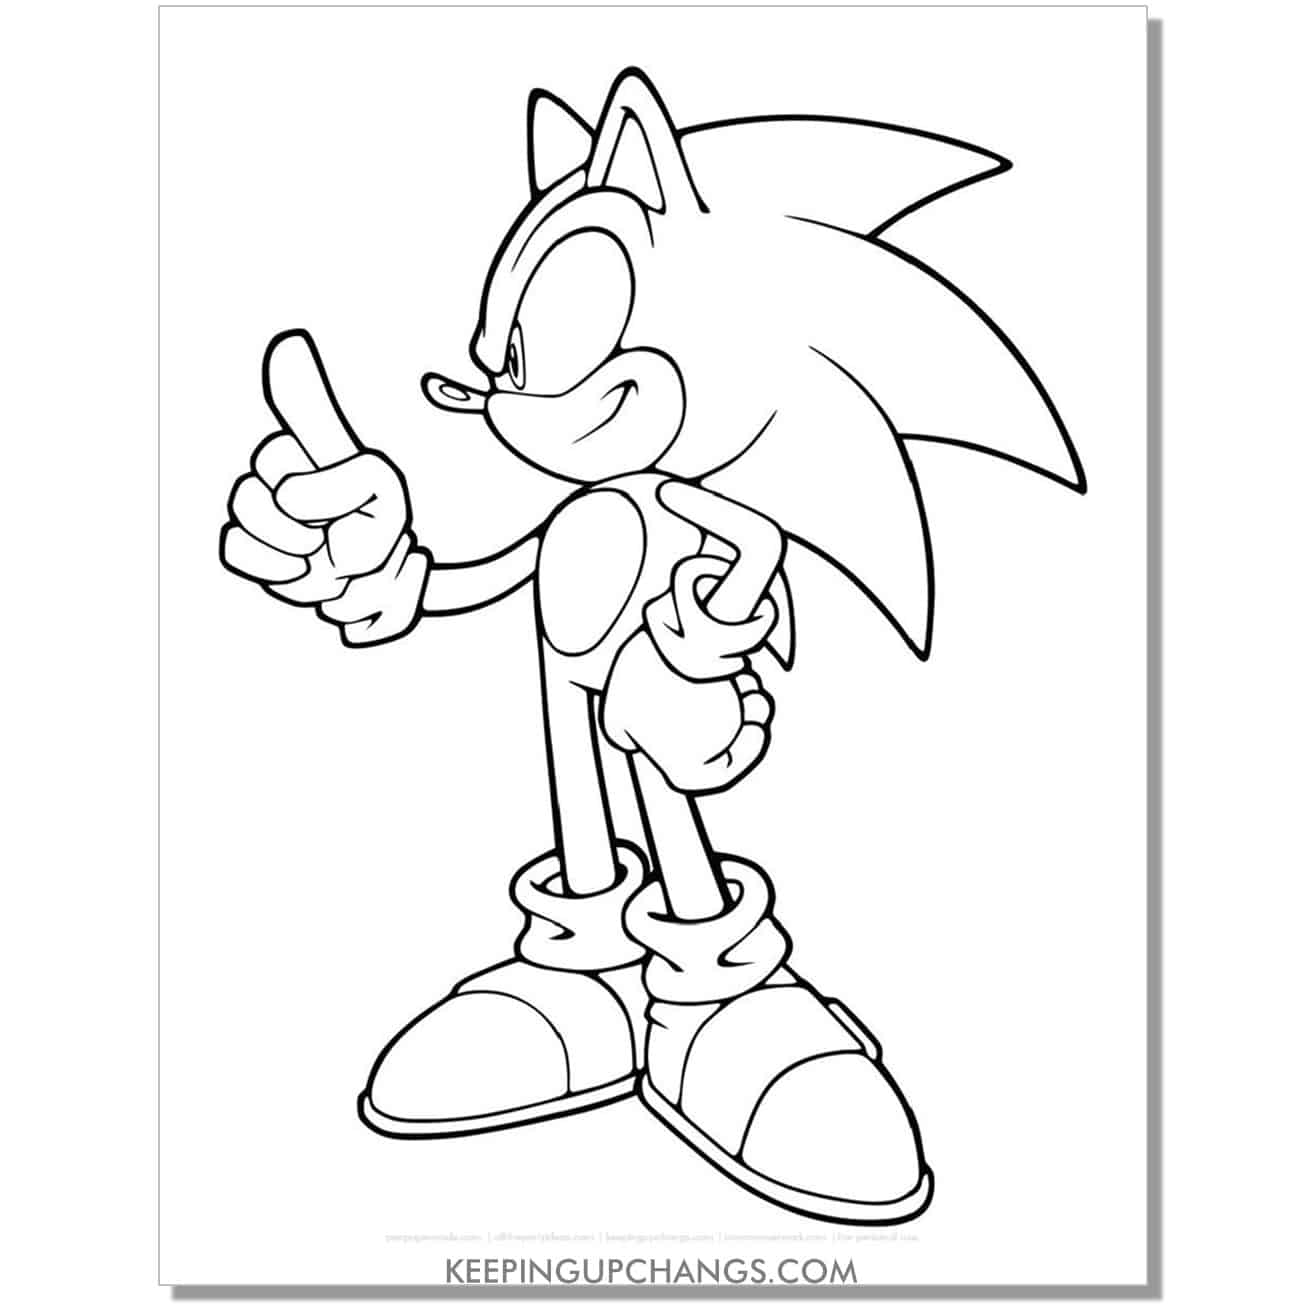 sonic with one arm on hip and other with index finger pointing coloring page.